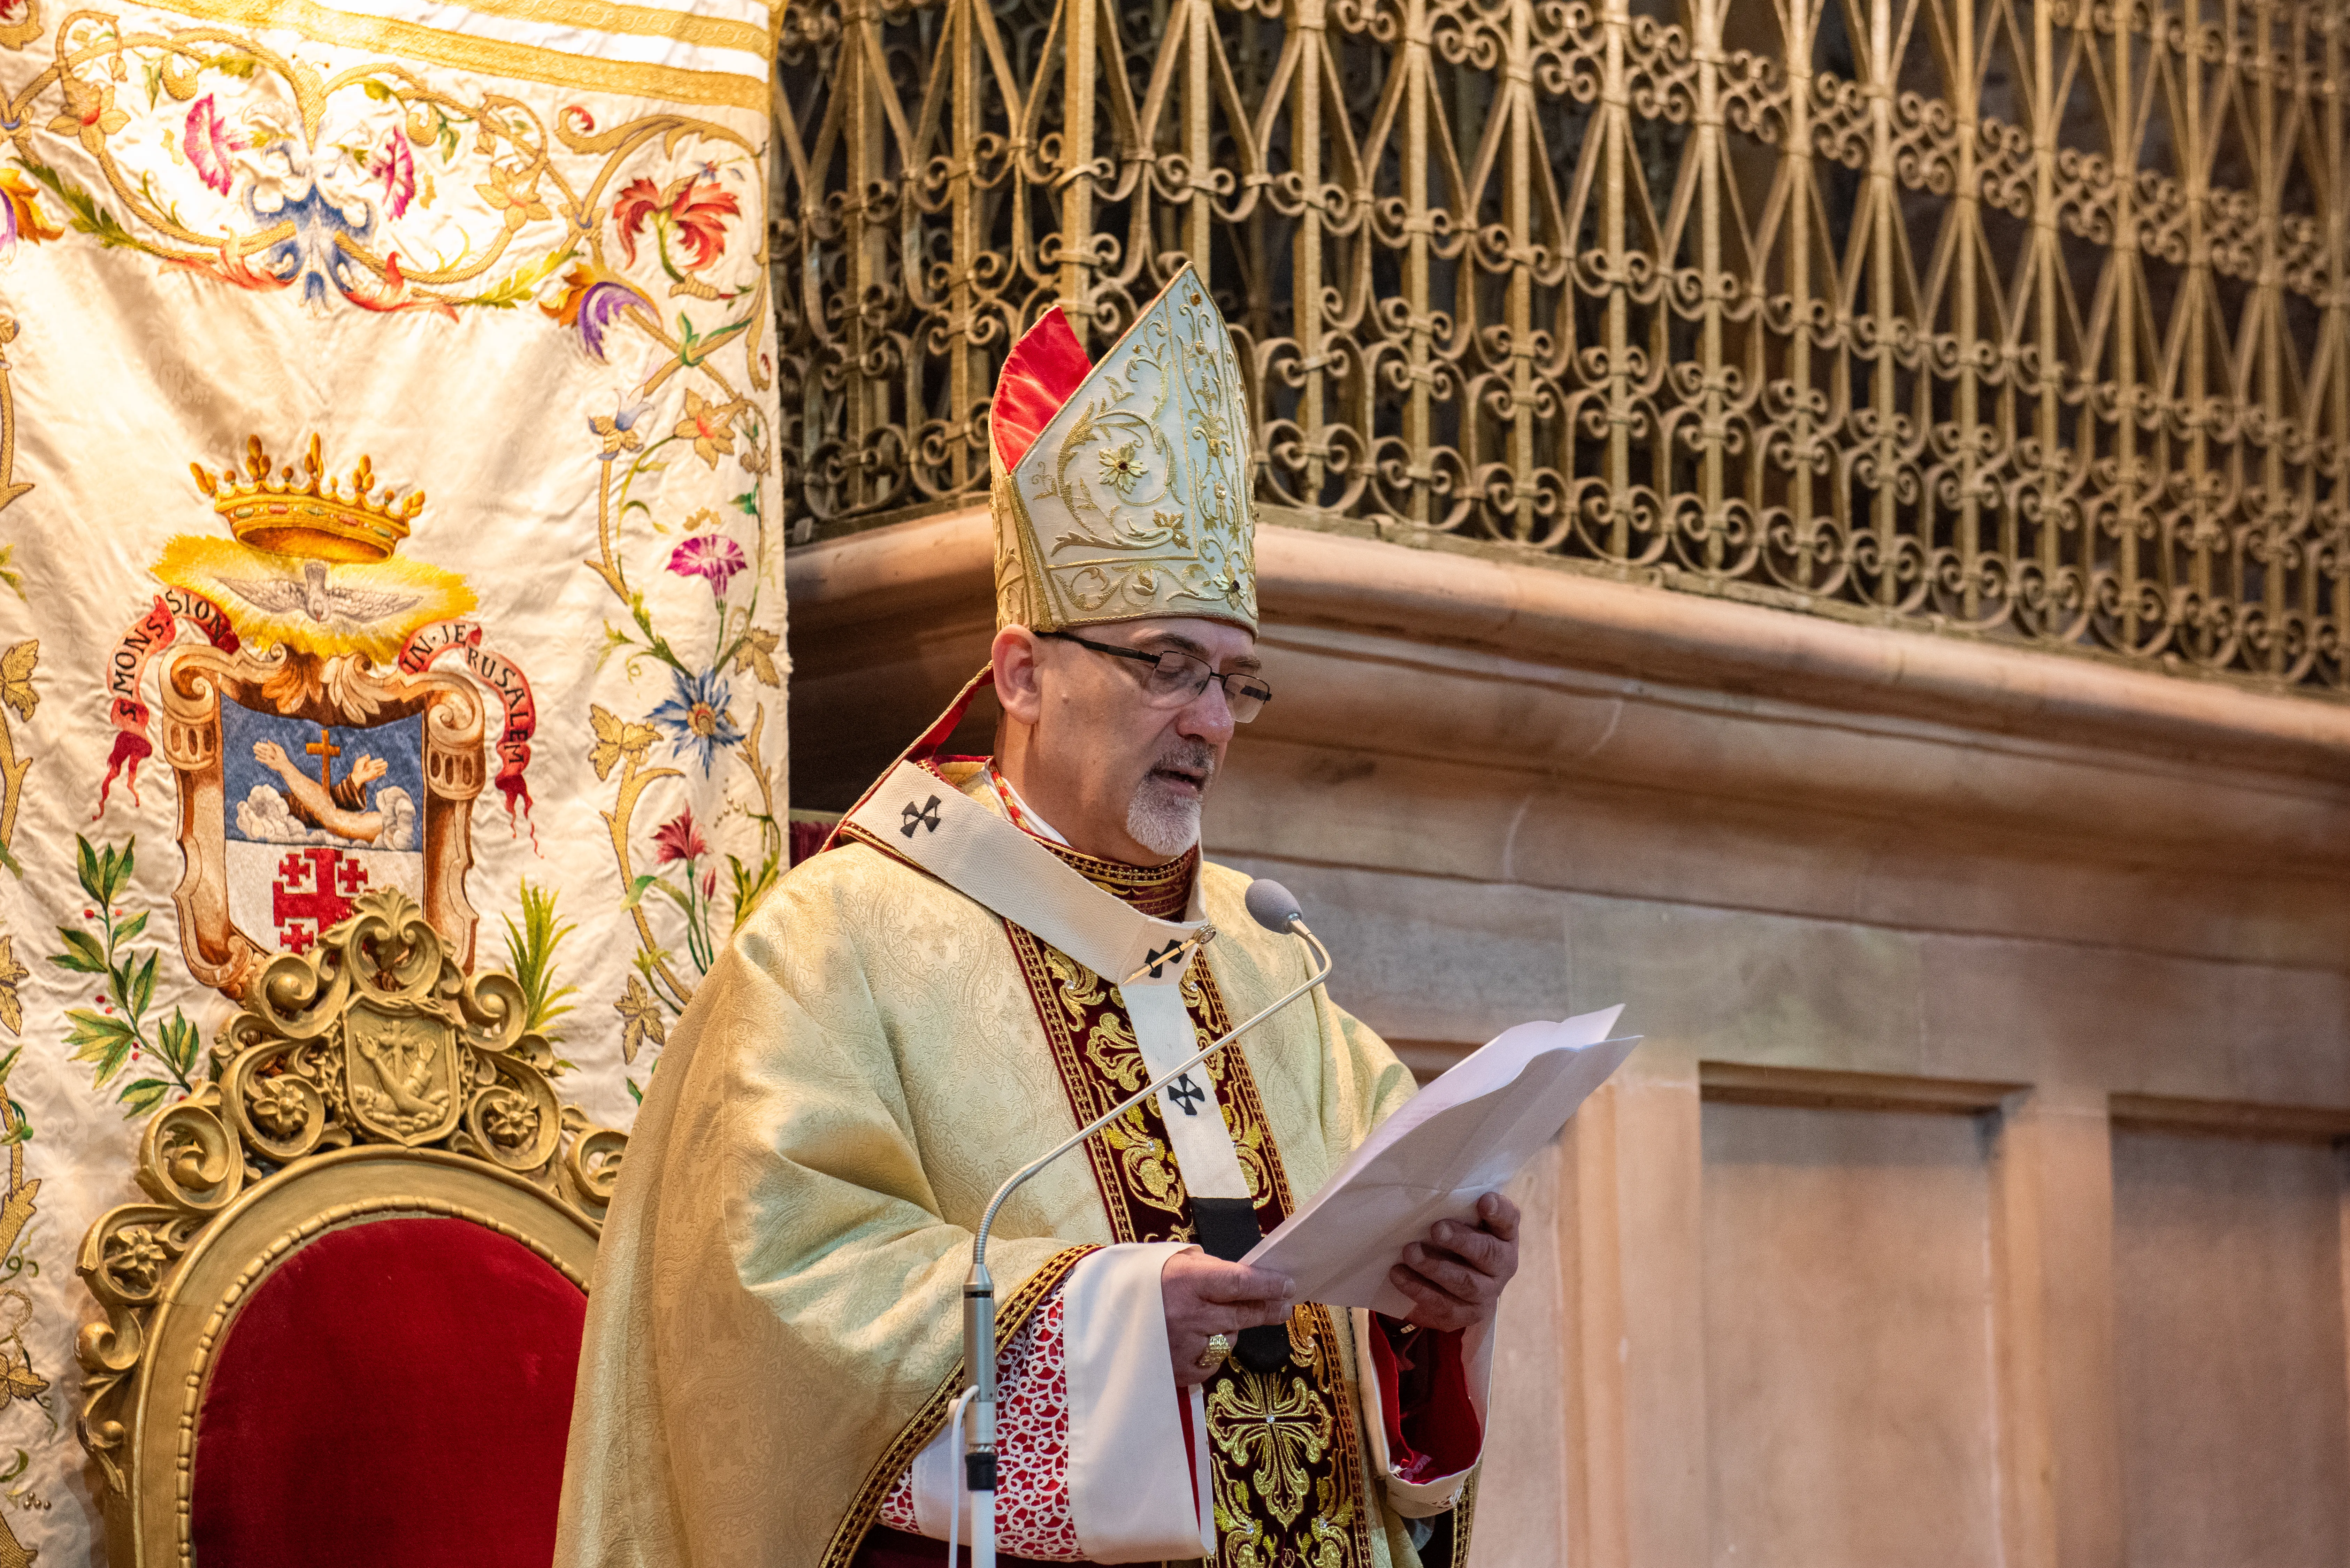 Cardinal Pierbattista Pizzaballa, the Latin Patriarch of Jerusalem, reads the homily during the Easter Vigil in the Basilica of the Holy Sepulcher  in Jerusalem, on the morning of Saturday, March 30, 2024. “Let us lift up our gaze!” urged the Patriarch in his homily.